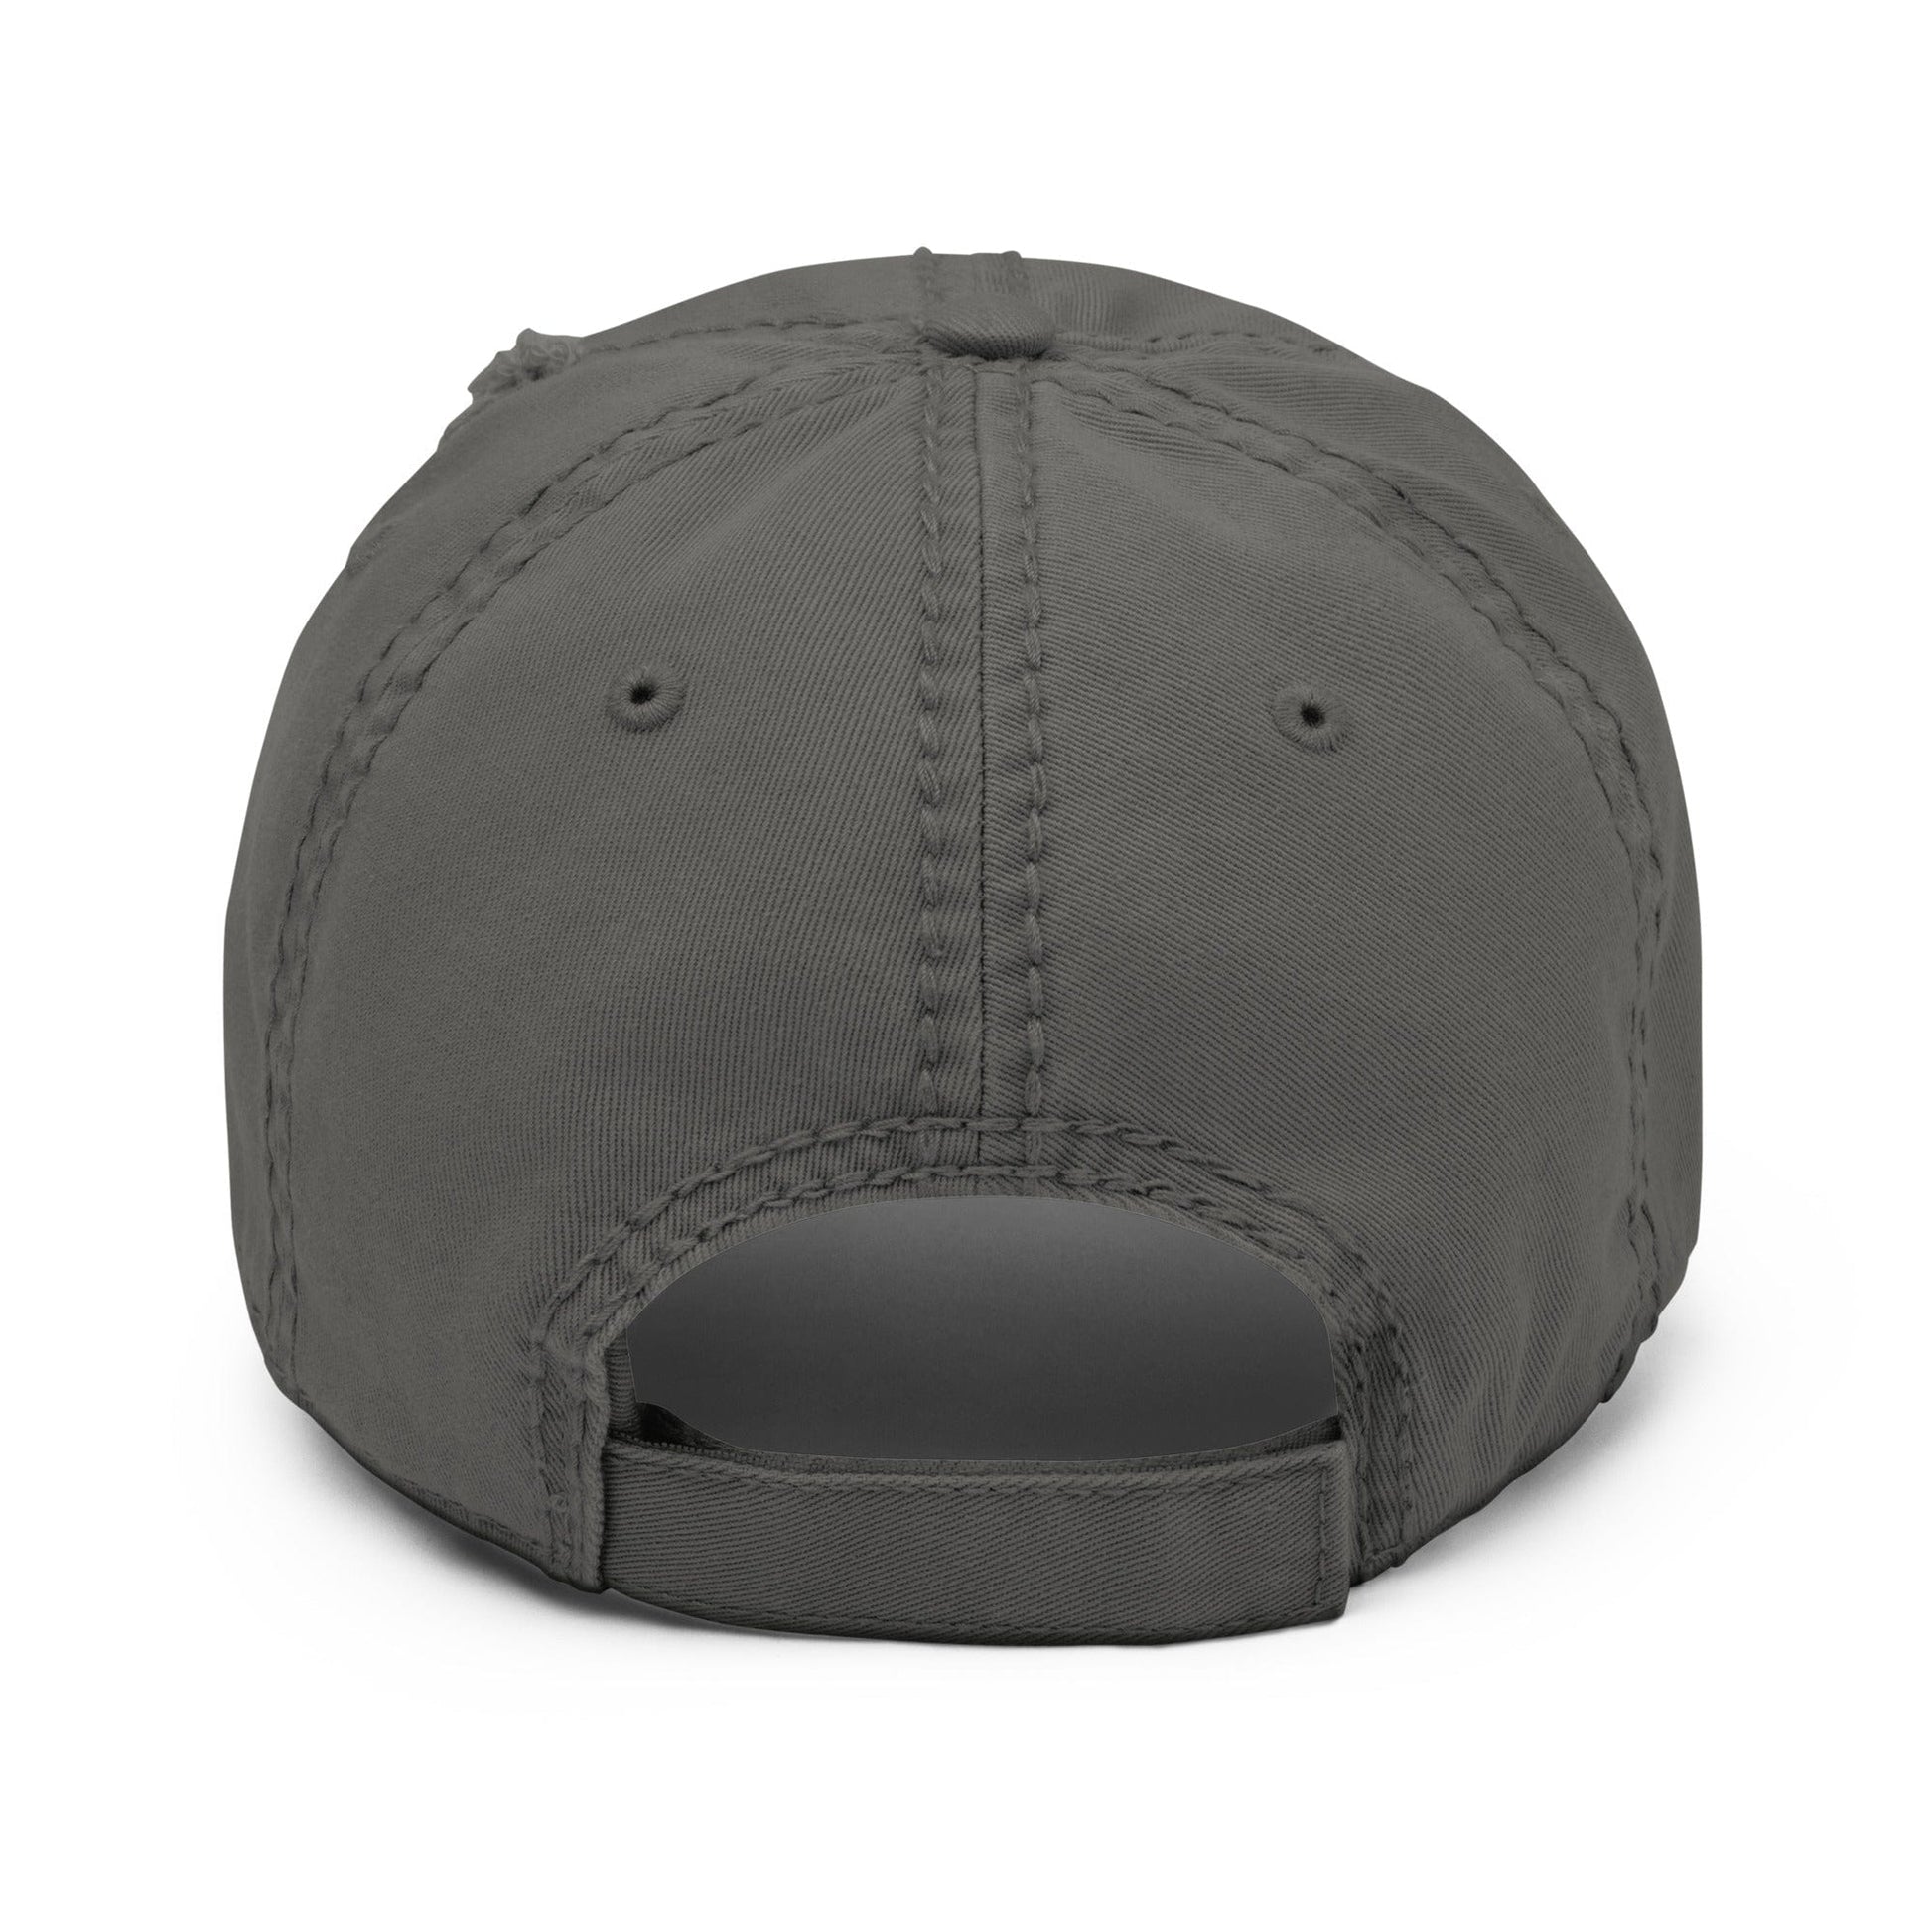 HONDA (Hang On, Not Done Accelerating) trucker hat | www.Olettop.com